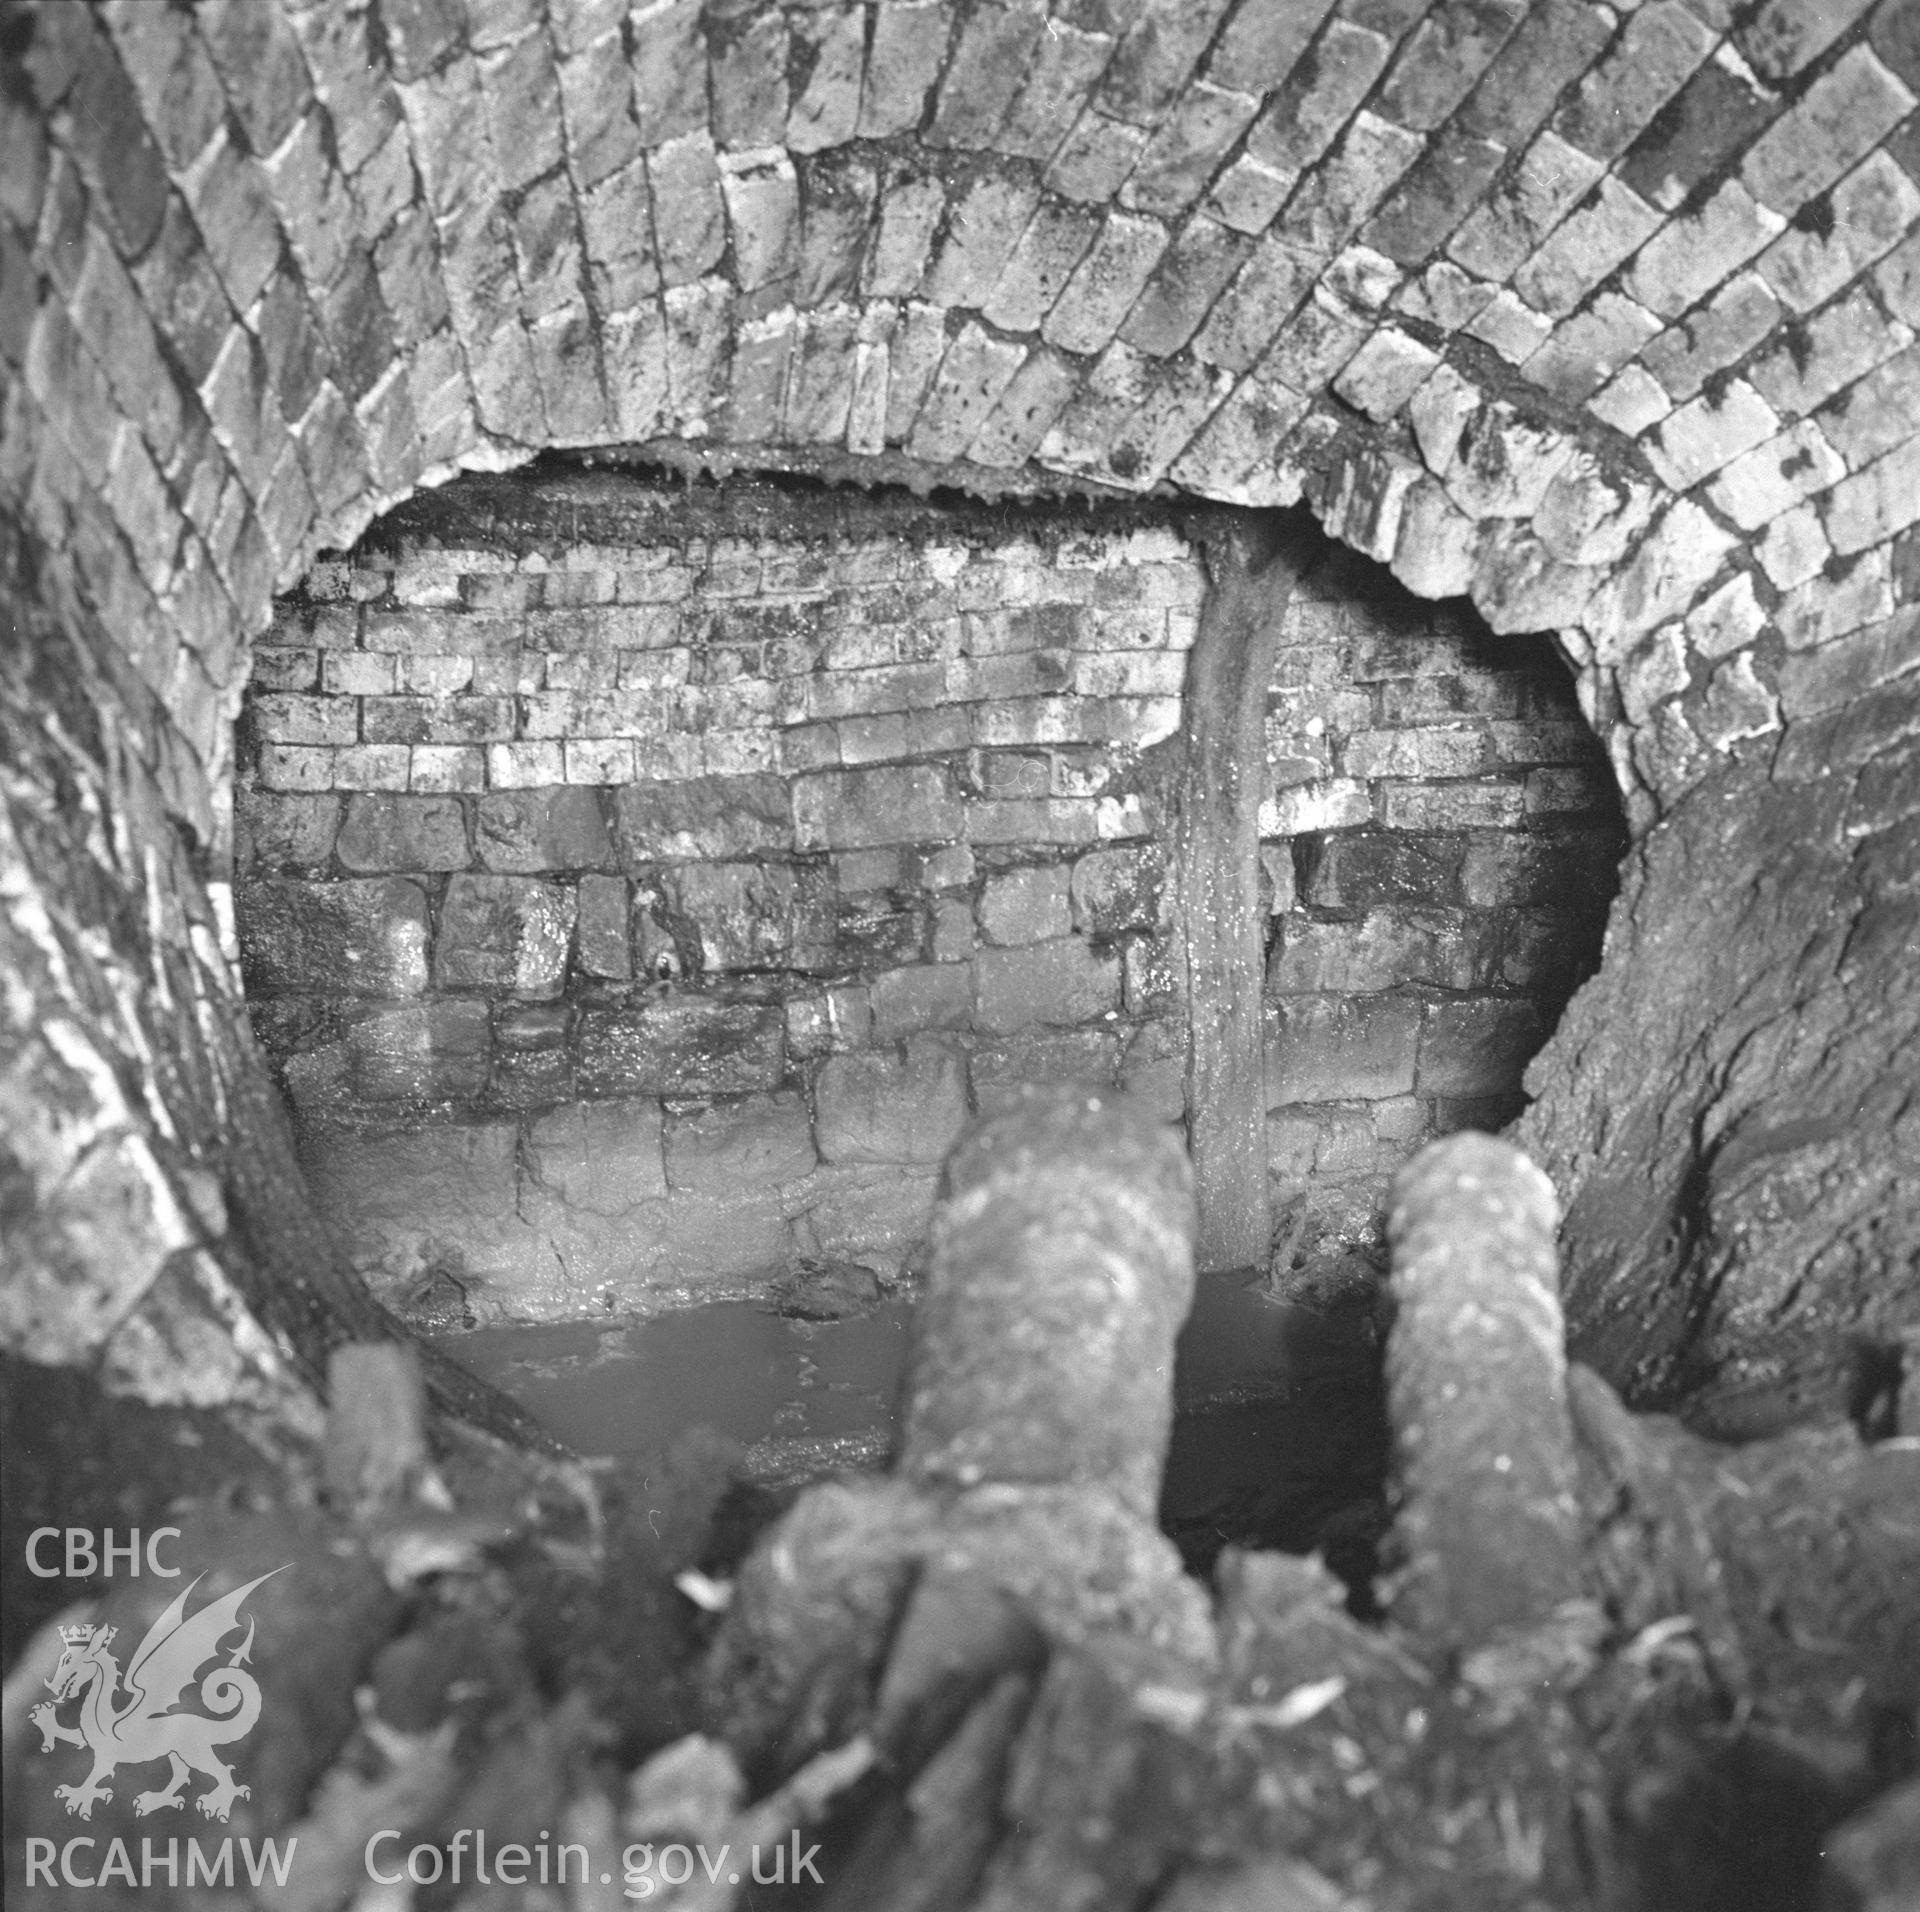 Digital copy of an acetate negative showing forge level from crosscut at Big Pit, from the John Cornwell Collection.